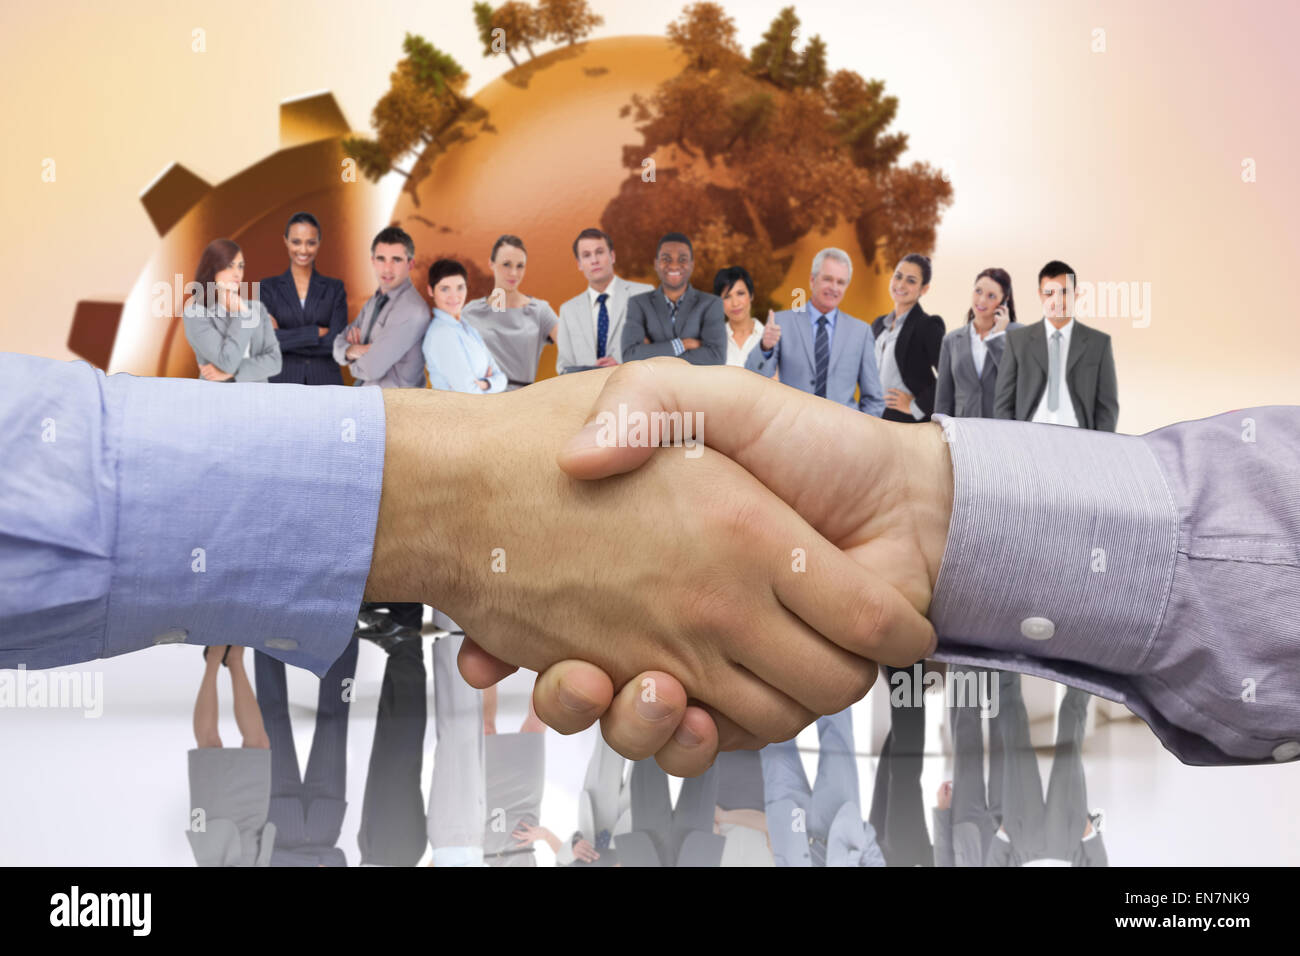 Composite image of hand shake in front of wires Stock Photo